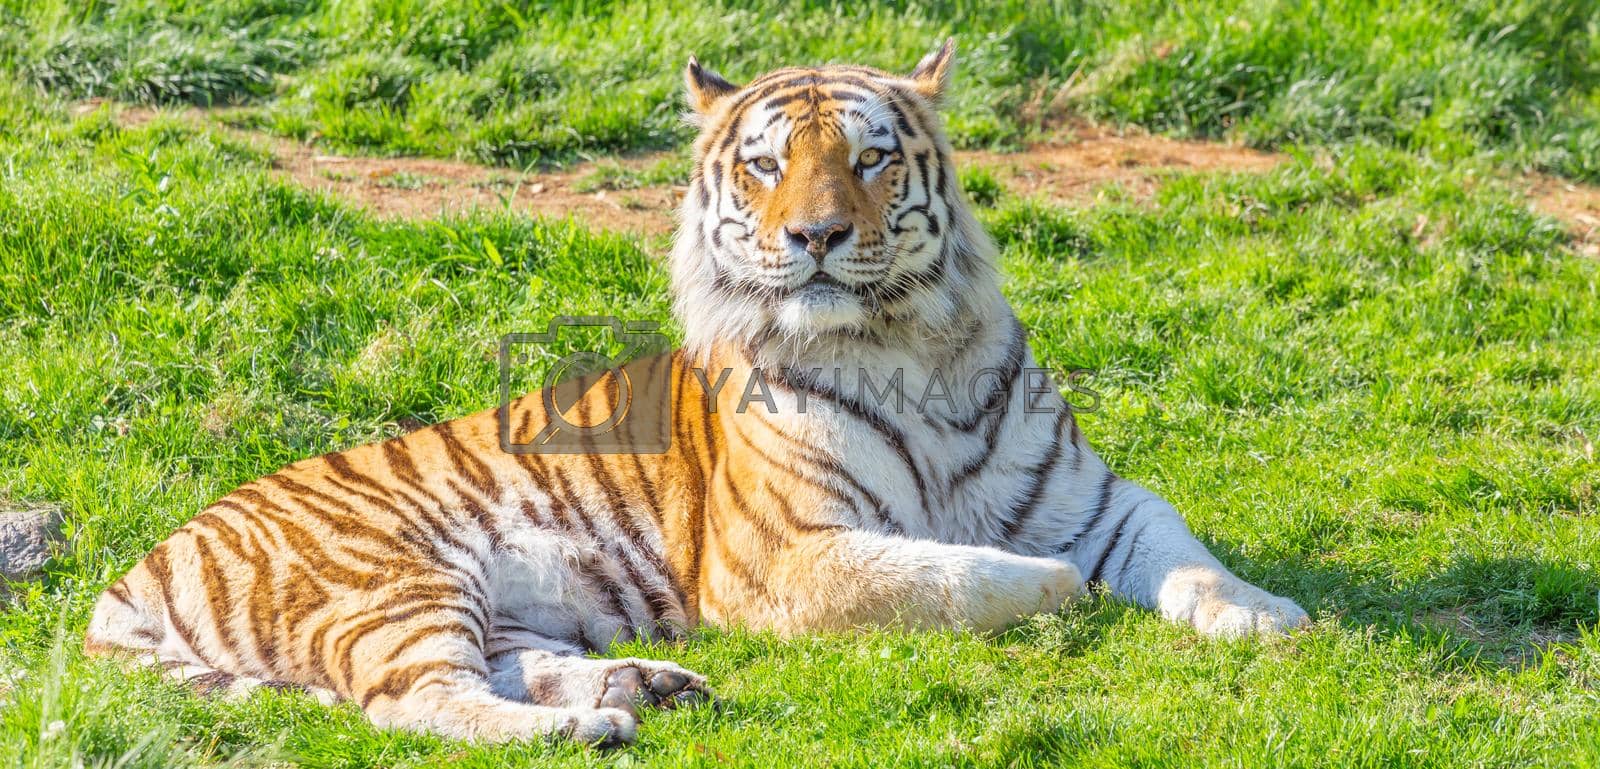 Royalty free image of Tiger in a wildlife zoo - one of the biggest carnivore in nature. by Perseomedusa